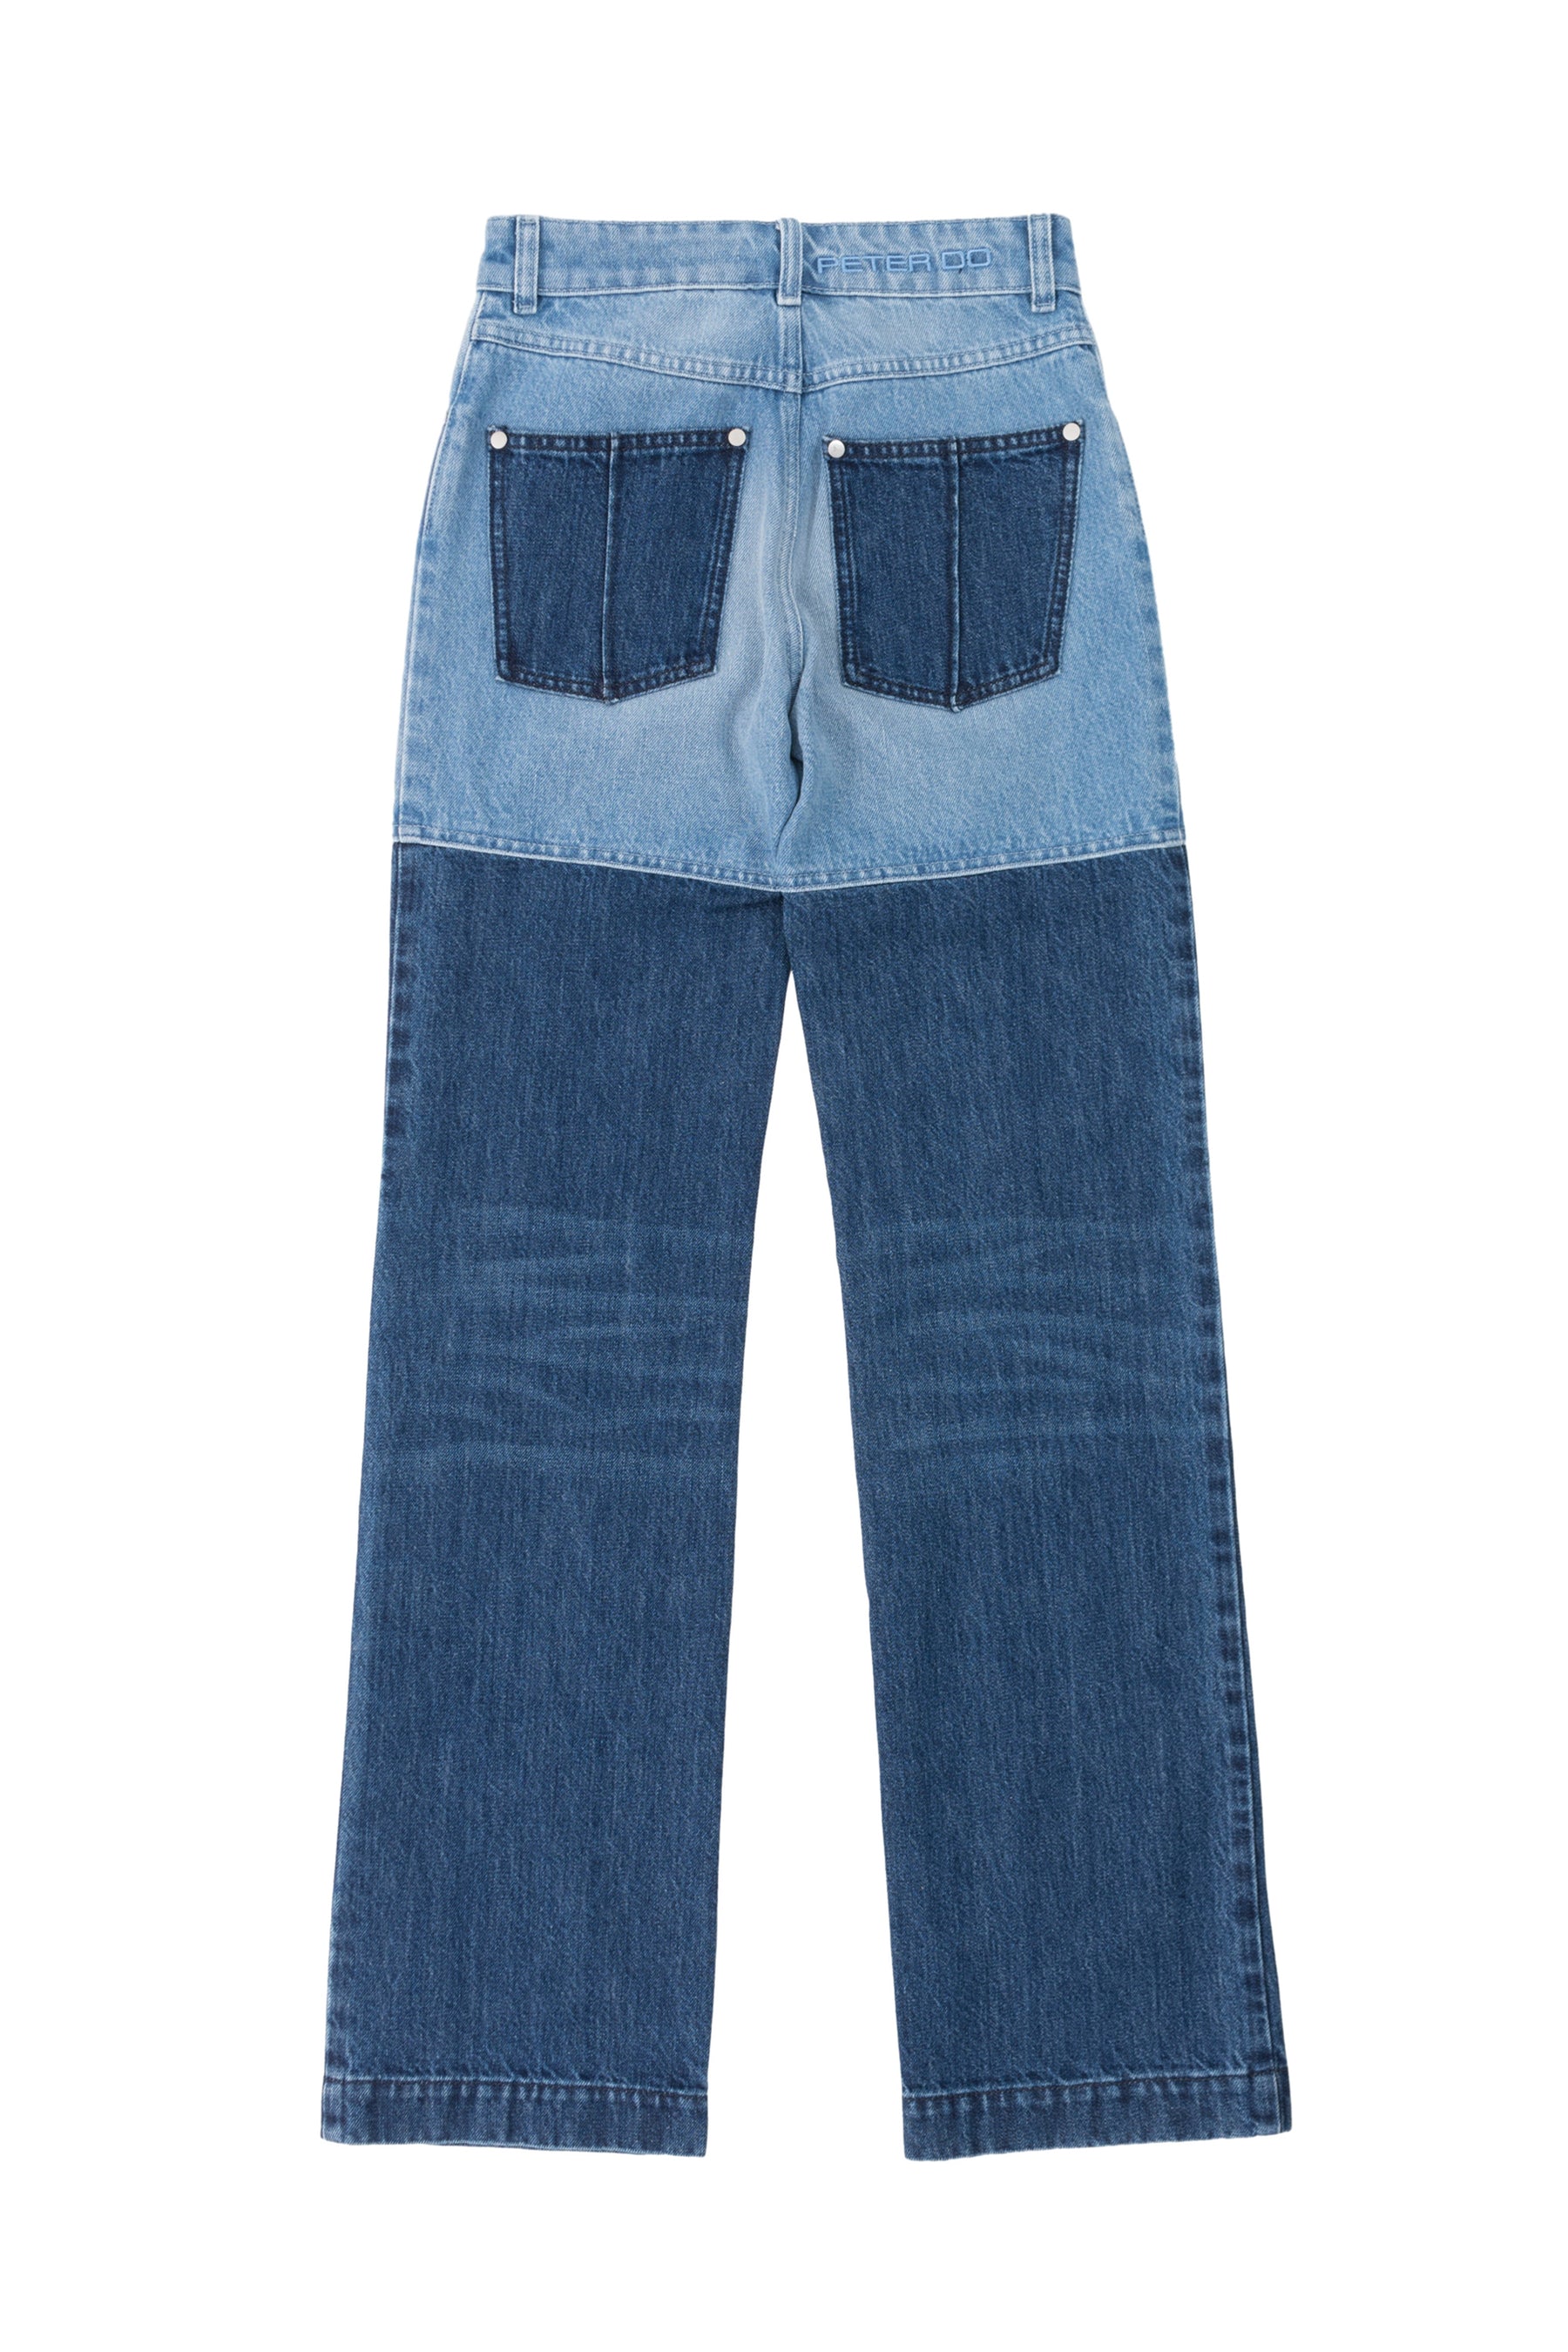 Peter do SS23 COMBO JEANS / BLE -NUBIAN